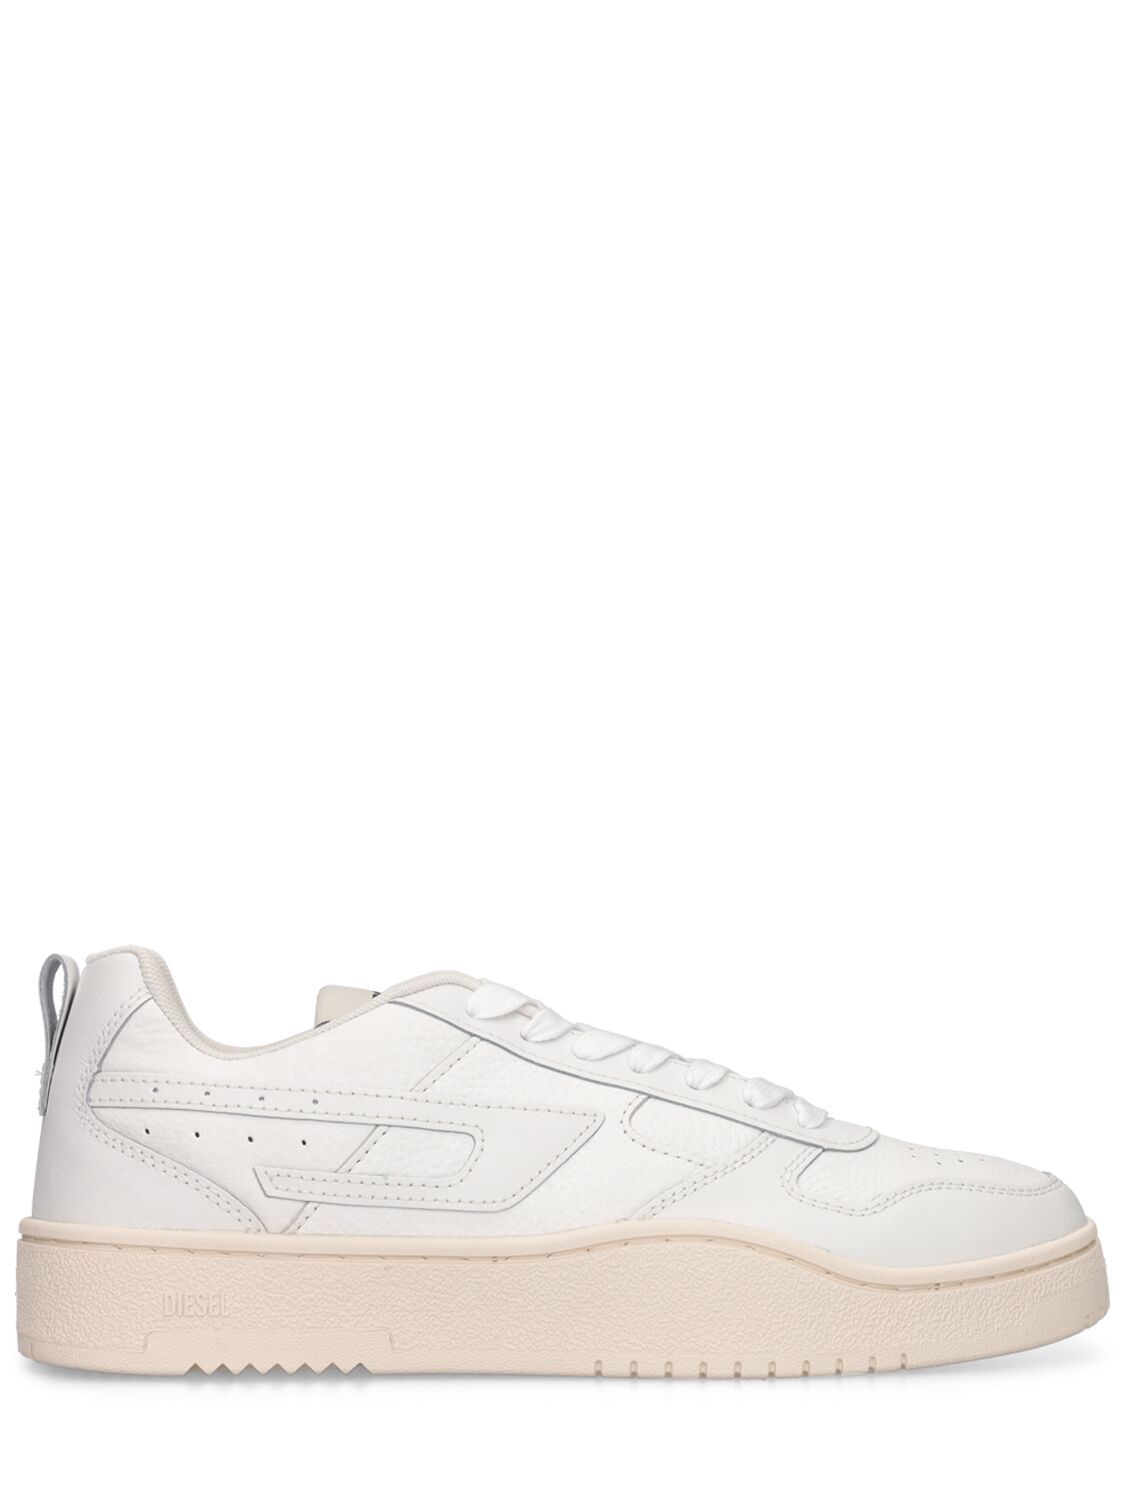 Diesel Ukiyo Low Top Leather Trainers In White